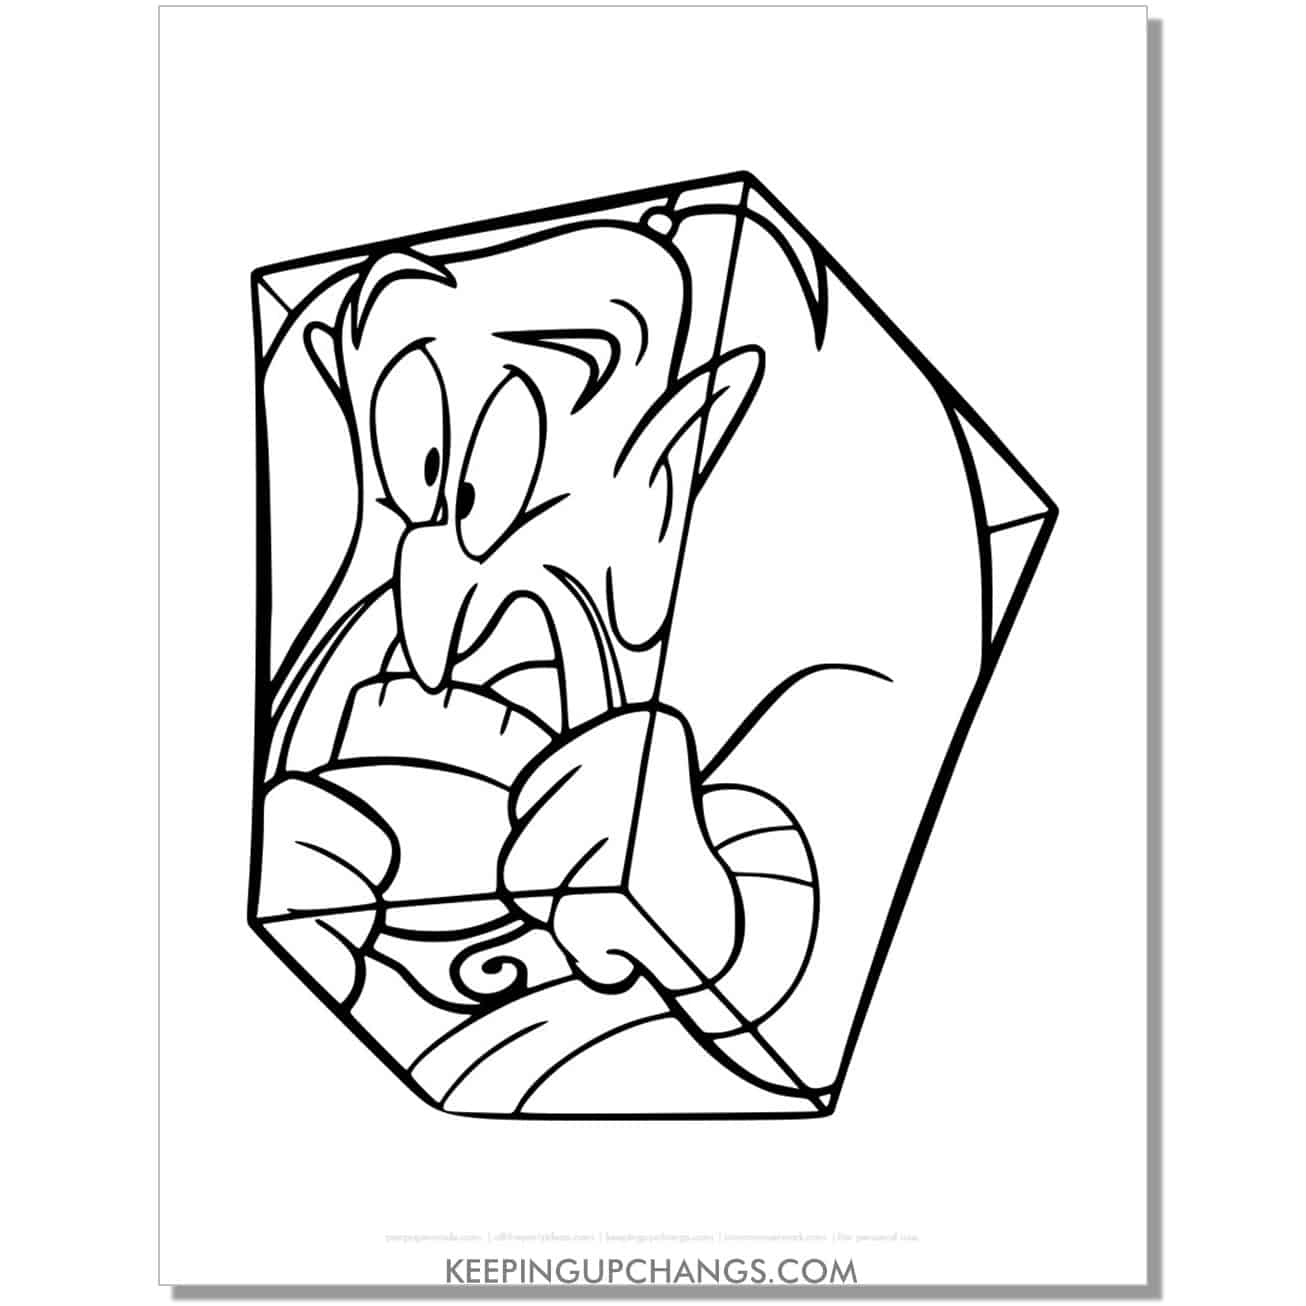 aladdin genie trapped in box coloring page, sheet.